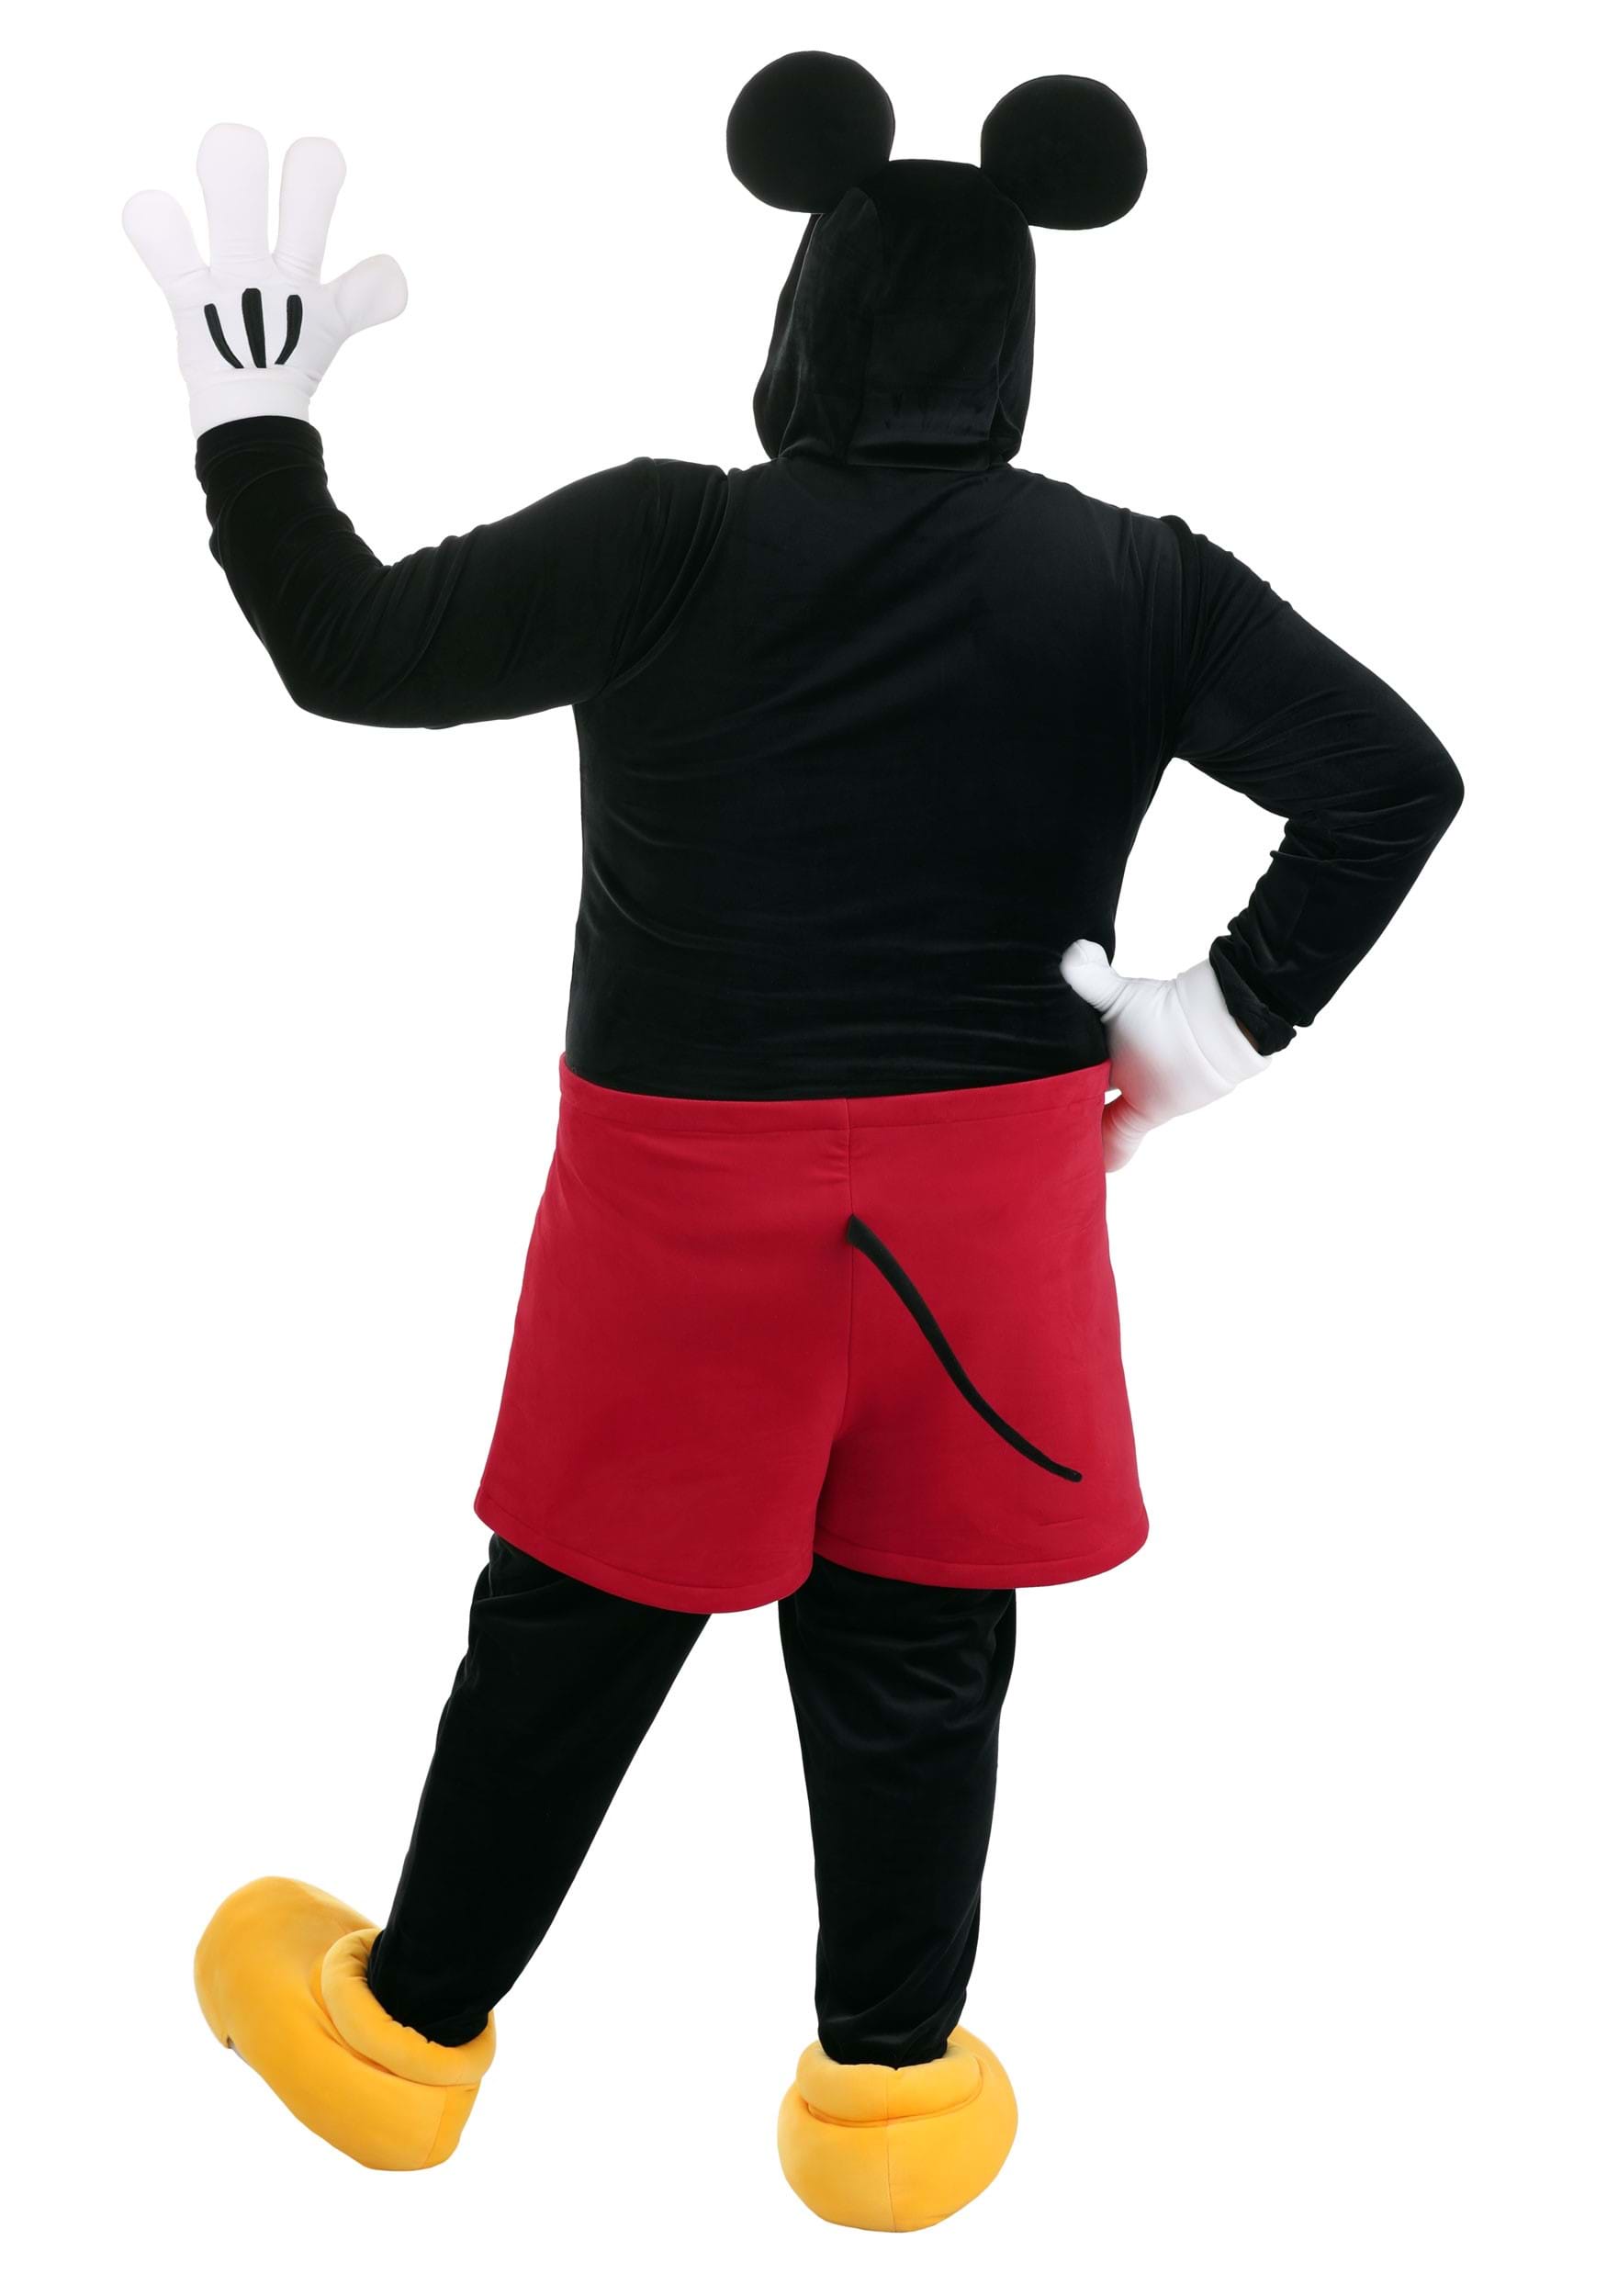 https://images.fun.com/products/74863/2-1-266395/plus-size-disney-deluxe-mickey-mouse-costume-alt-2.jpg